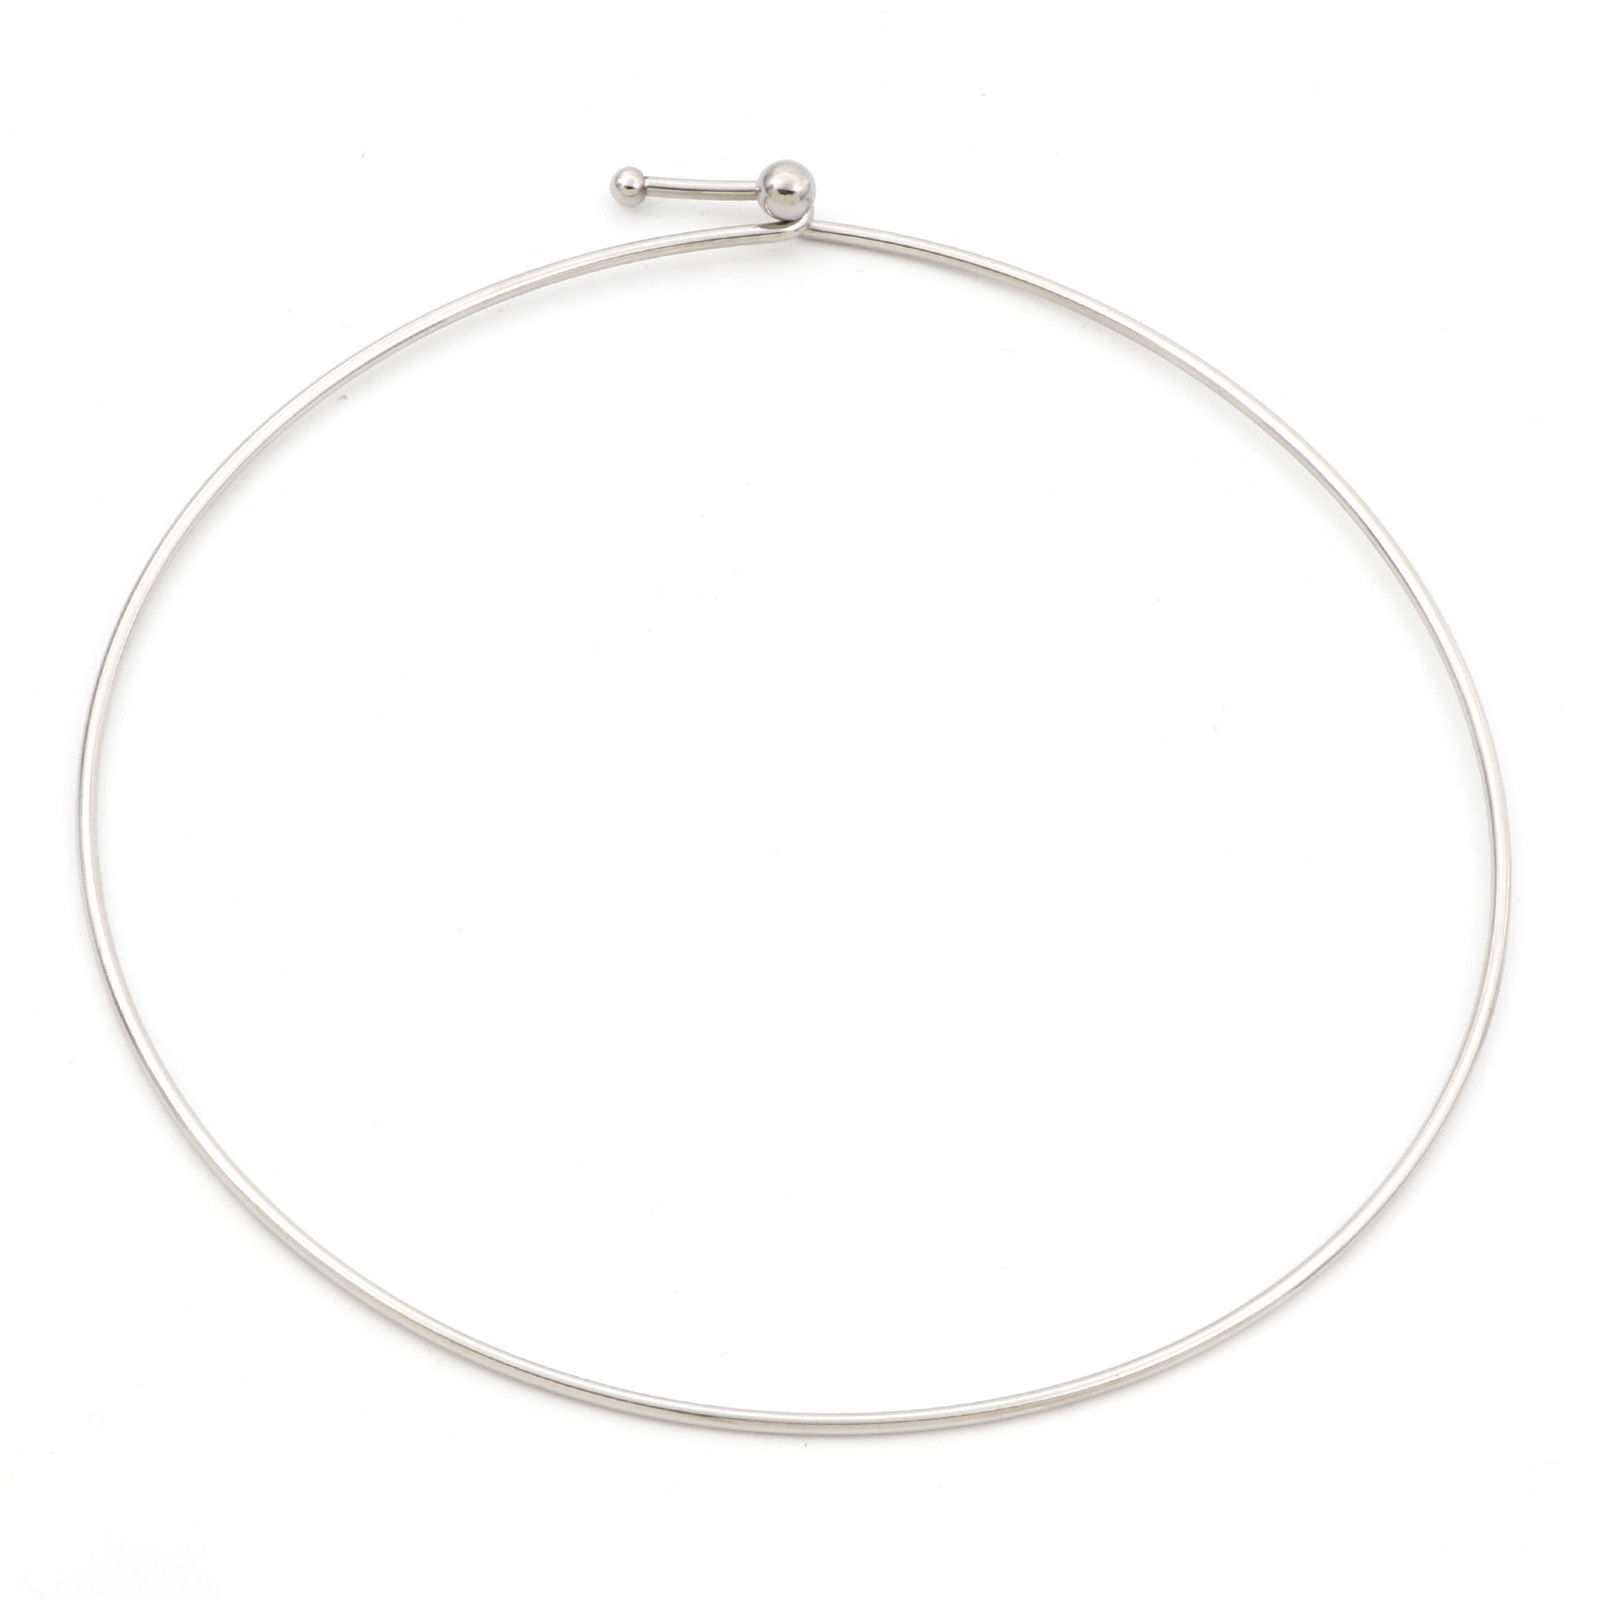 Picture of Eco-friendly 304 Stainless Steel Collar Neck Ring Necklace Silver Tone 43cm(16 7/8") long, 1 Piece